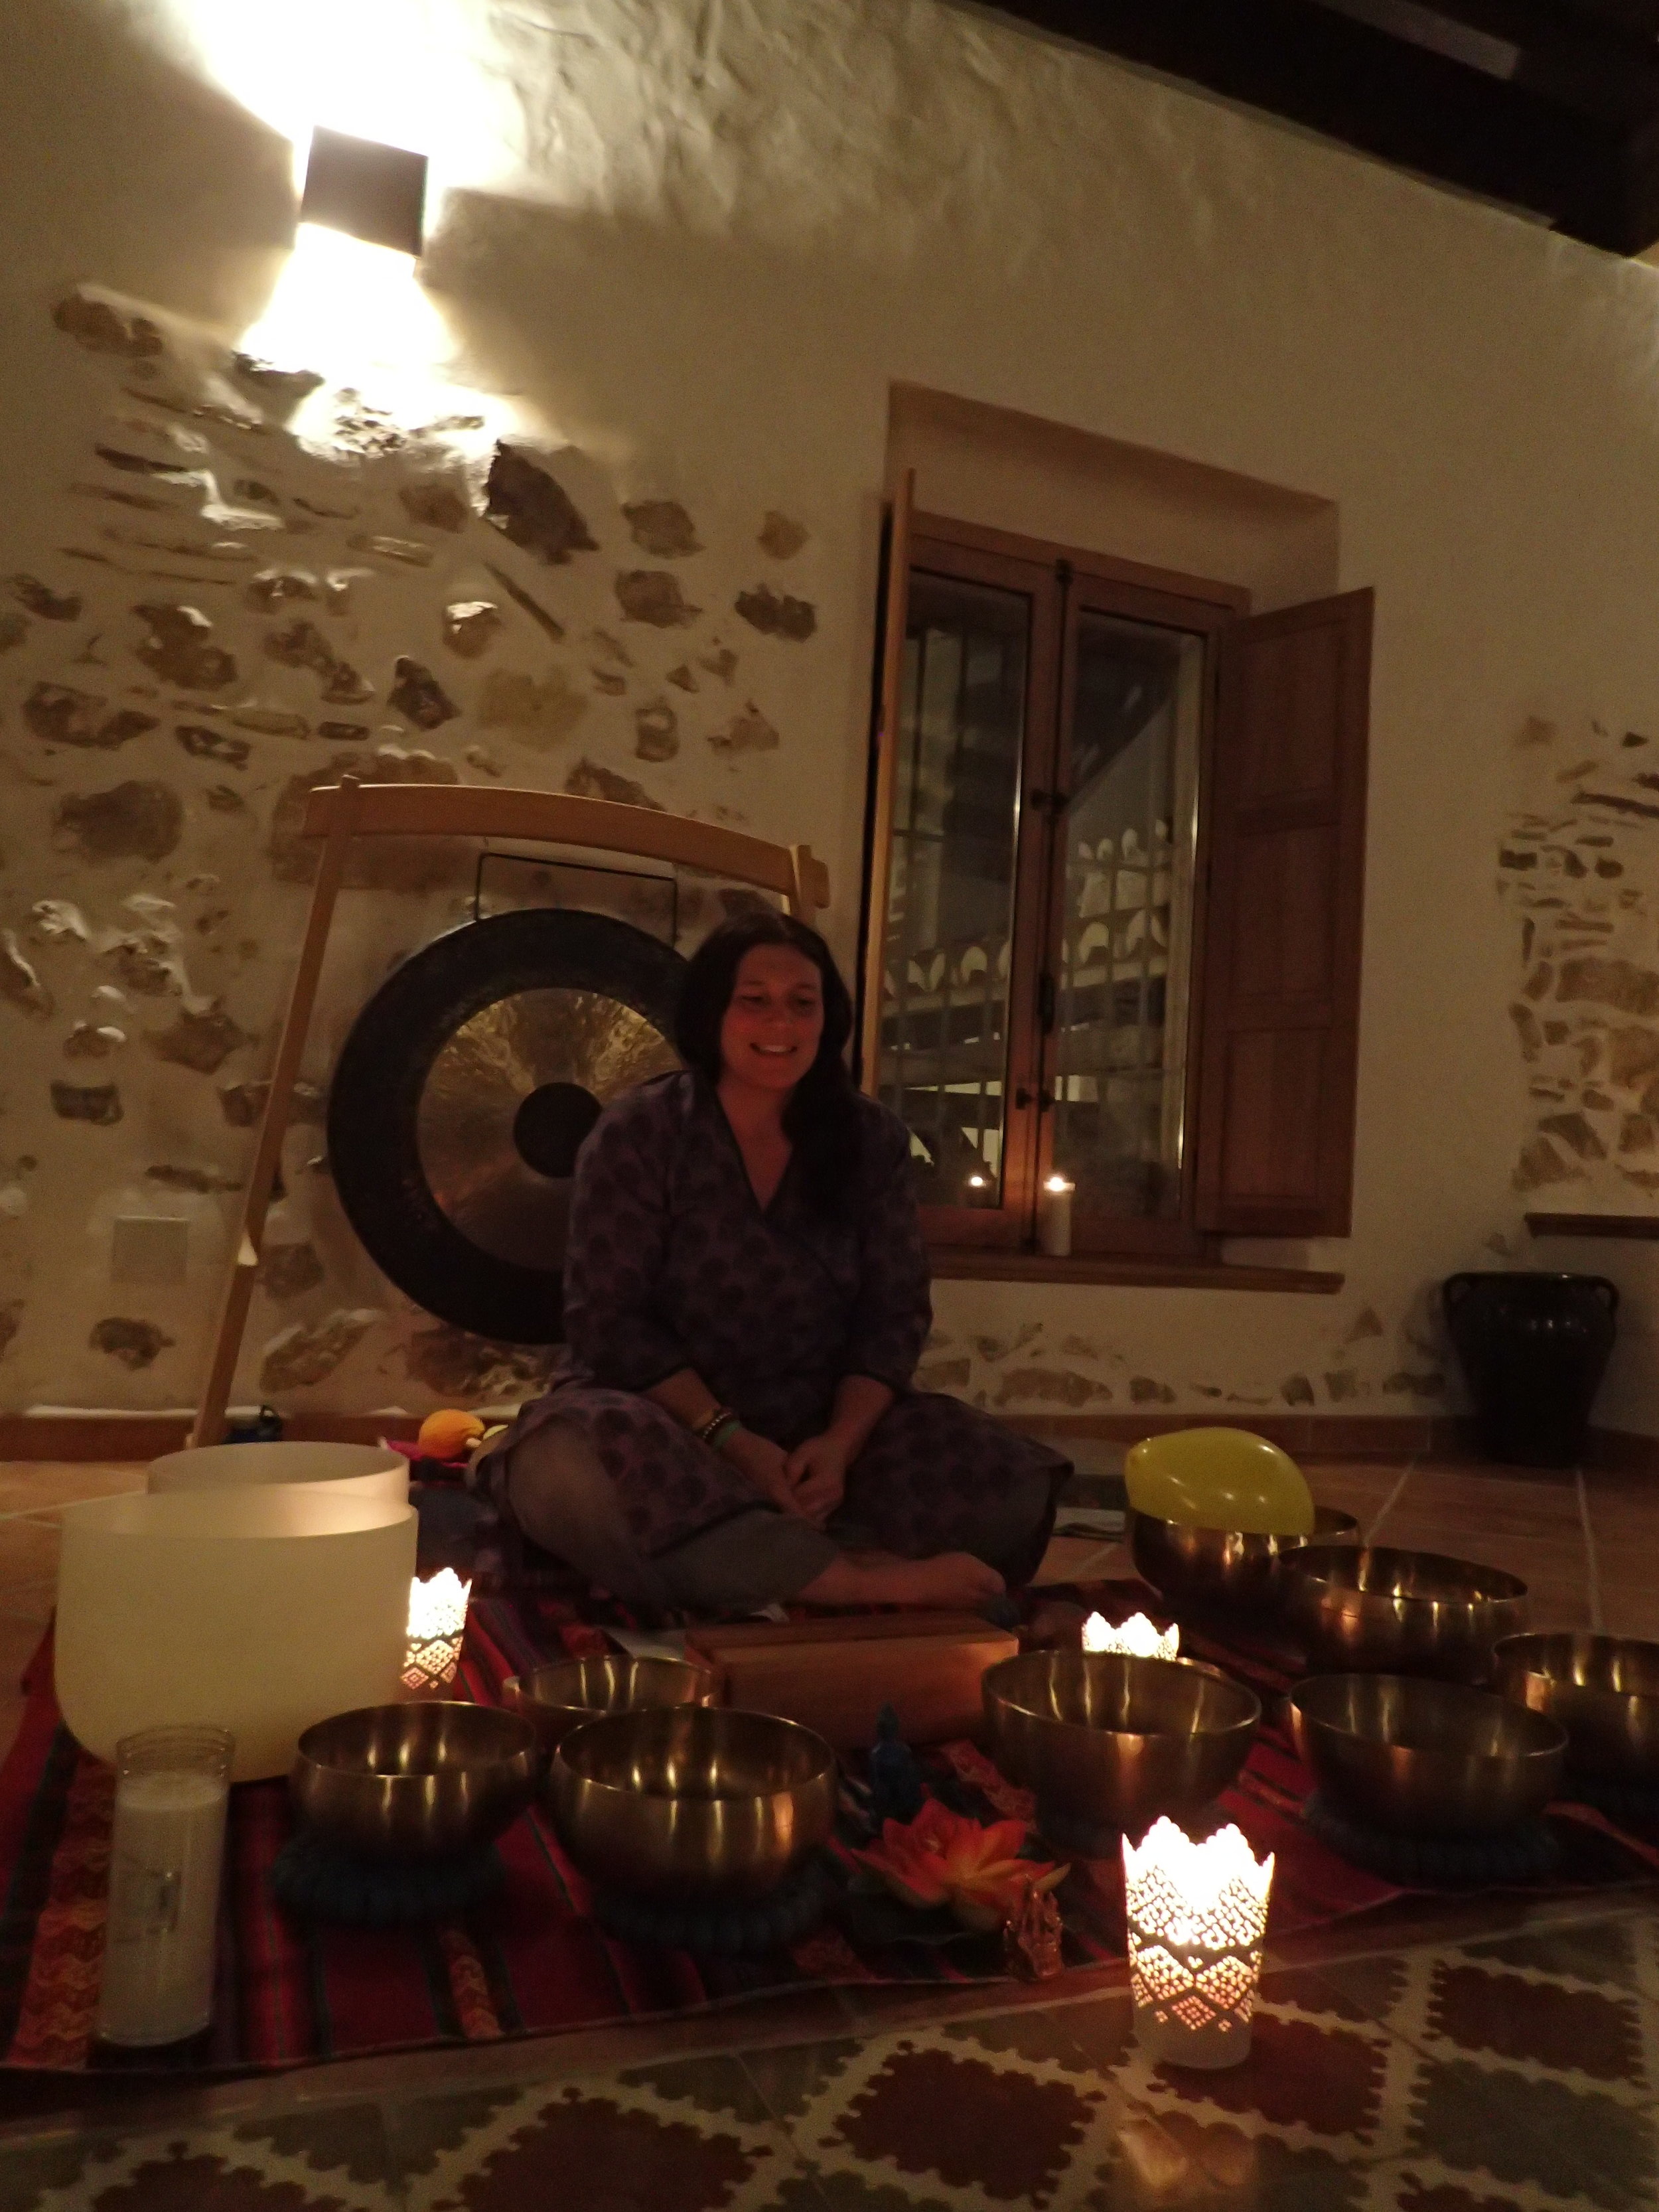 Sound journey with Tiziana at Yin Yang Yoga retreat in the Malaga mountains in Spain with Jane Bakx Yoga (Copy) (Copy)